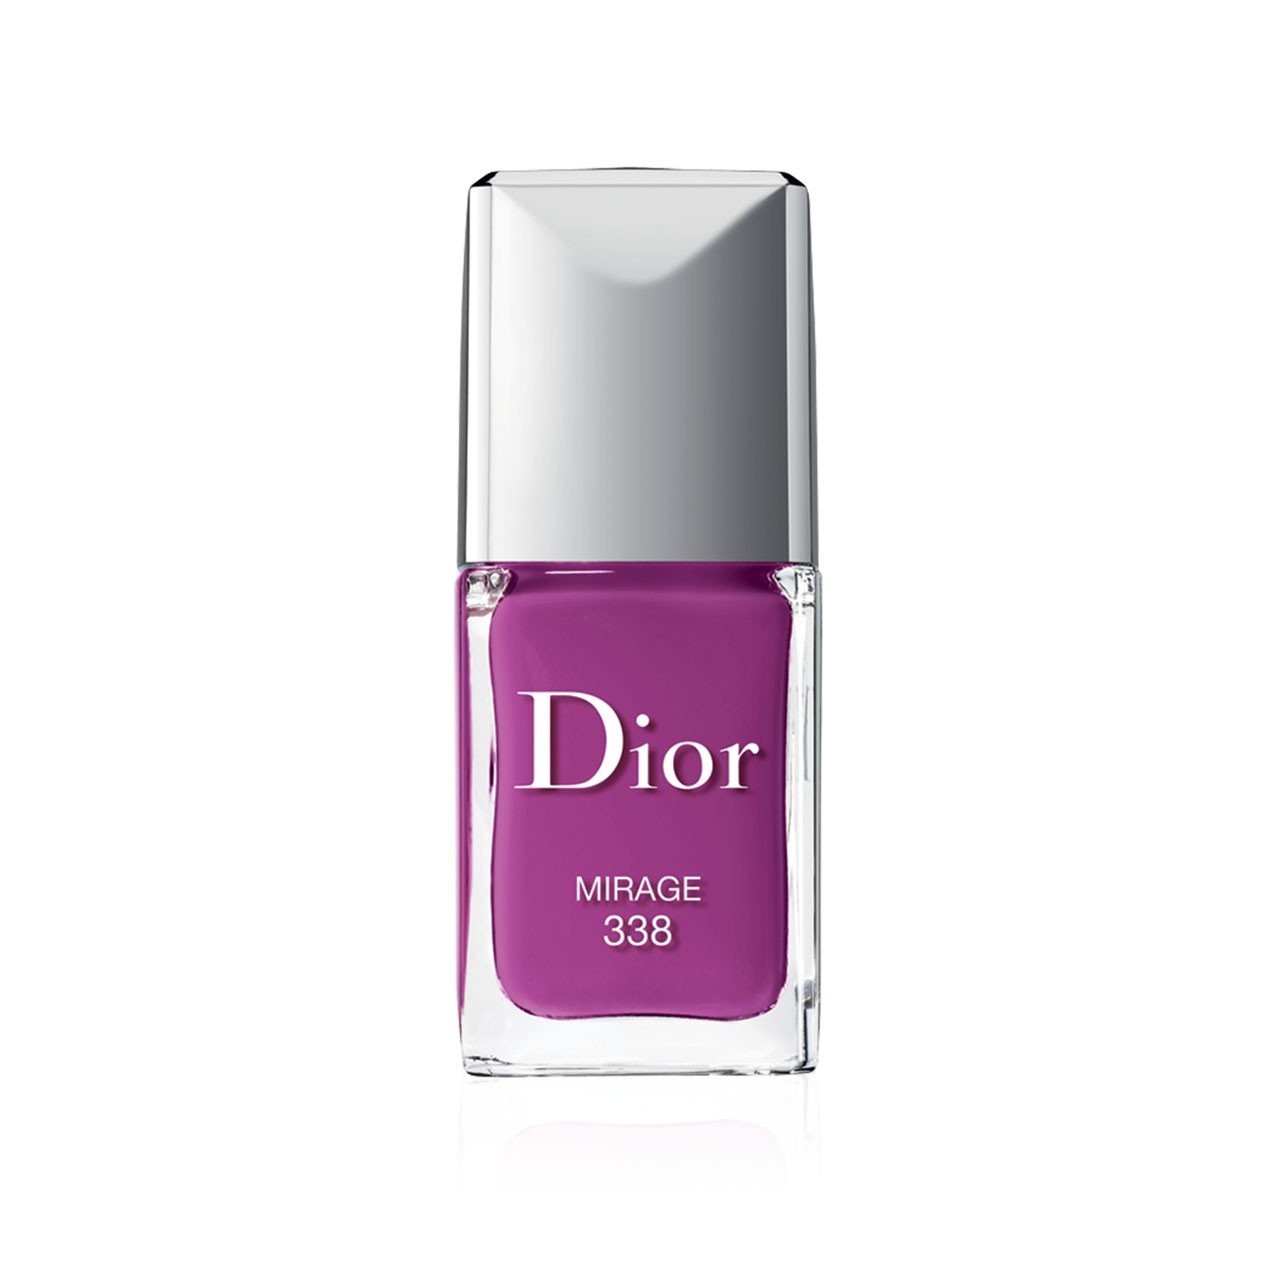 dior-vernis-long-wear-nail-lacquer-mirage-338-copy.jpg